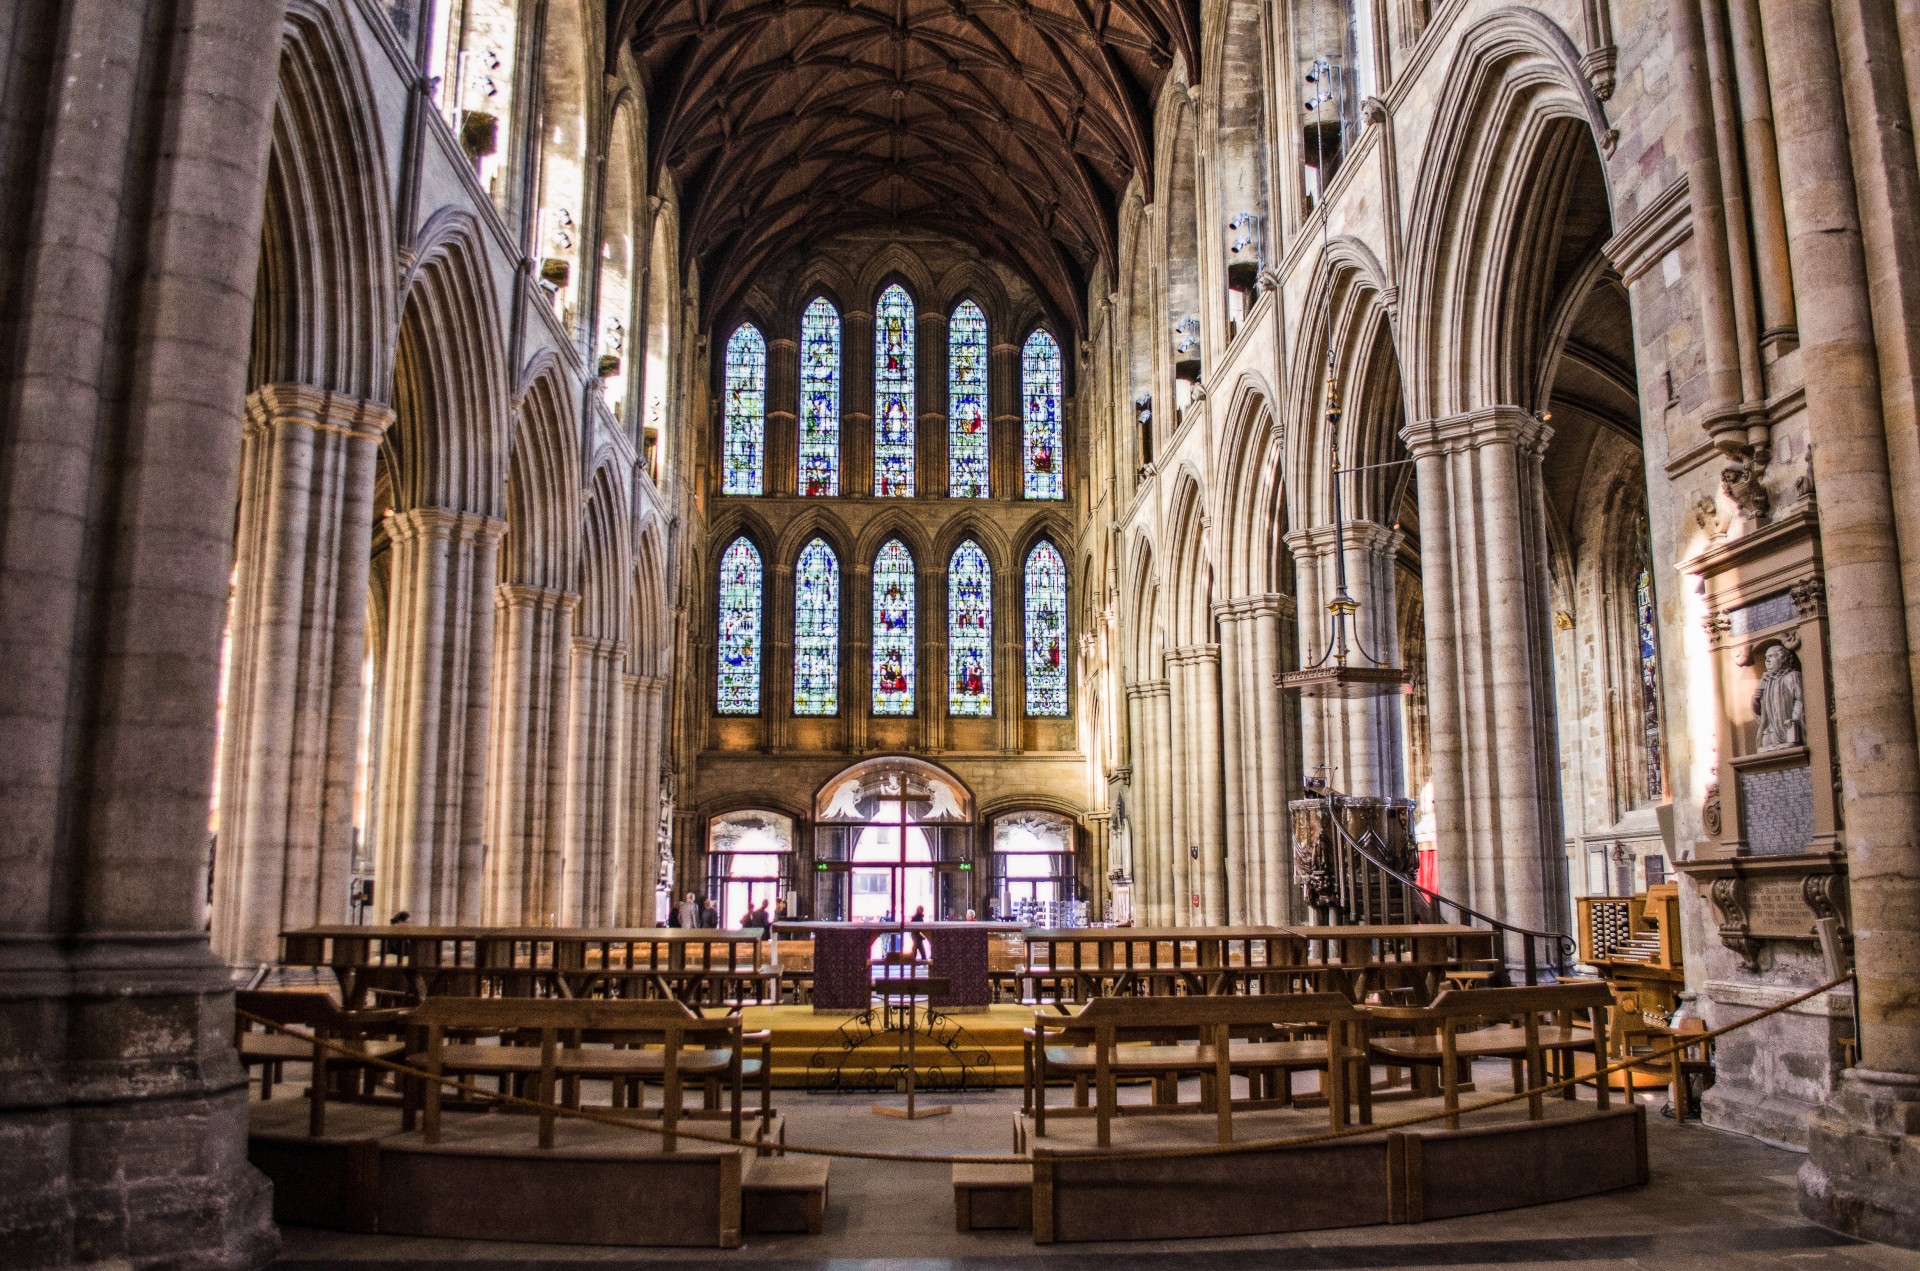 the interior of the Ripon Cathedral in North Yorkshire, England.